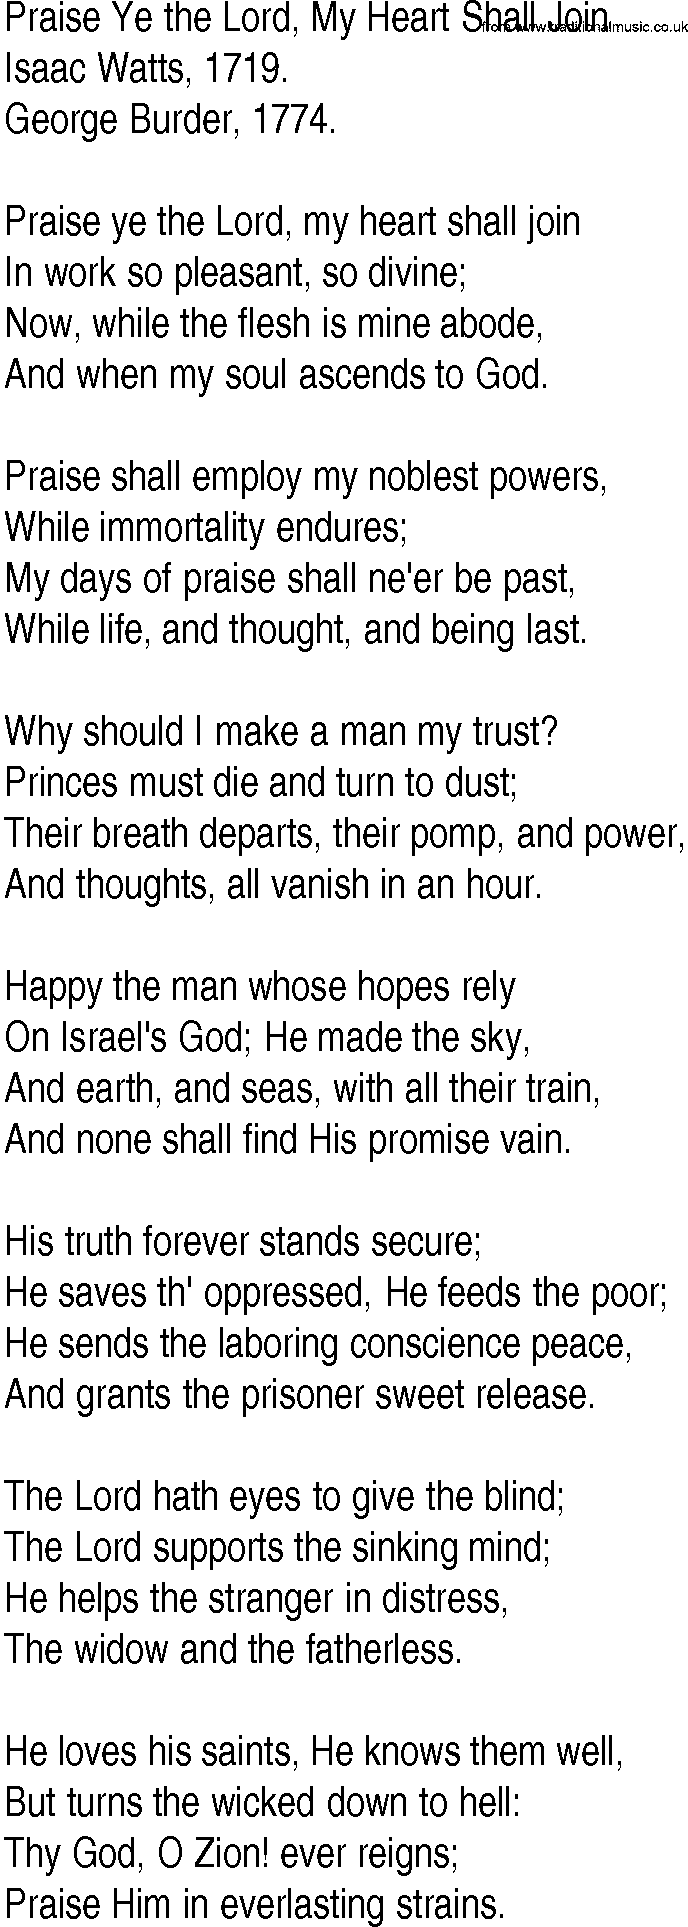 Hymn and Gospel Song: Praise Ye the Lord, My Heart Shall Join by Isaac Watts lyrics